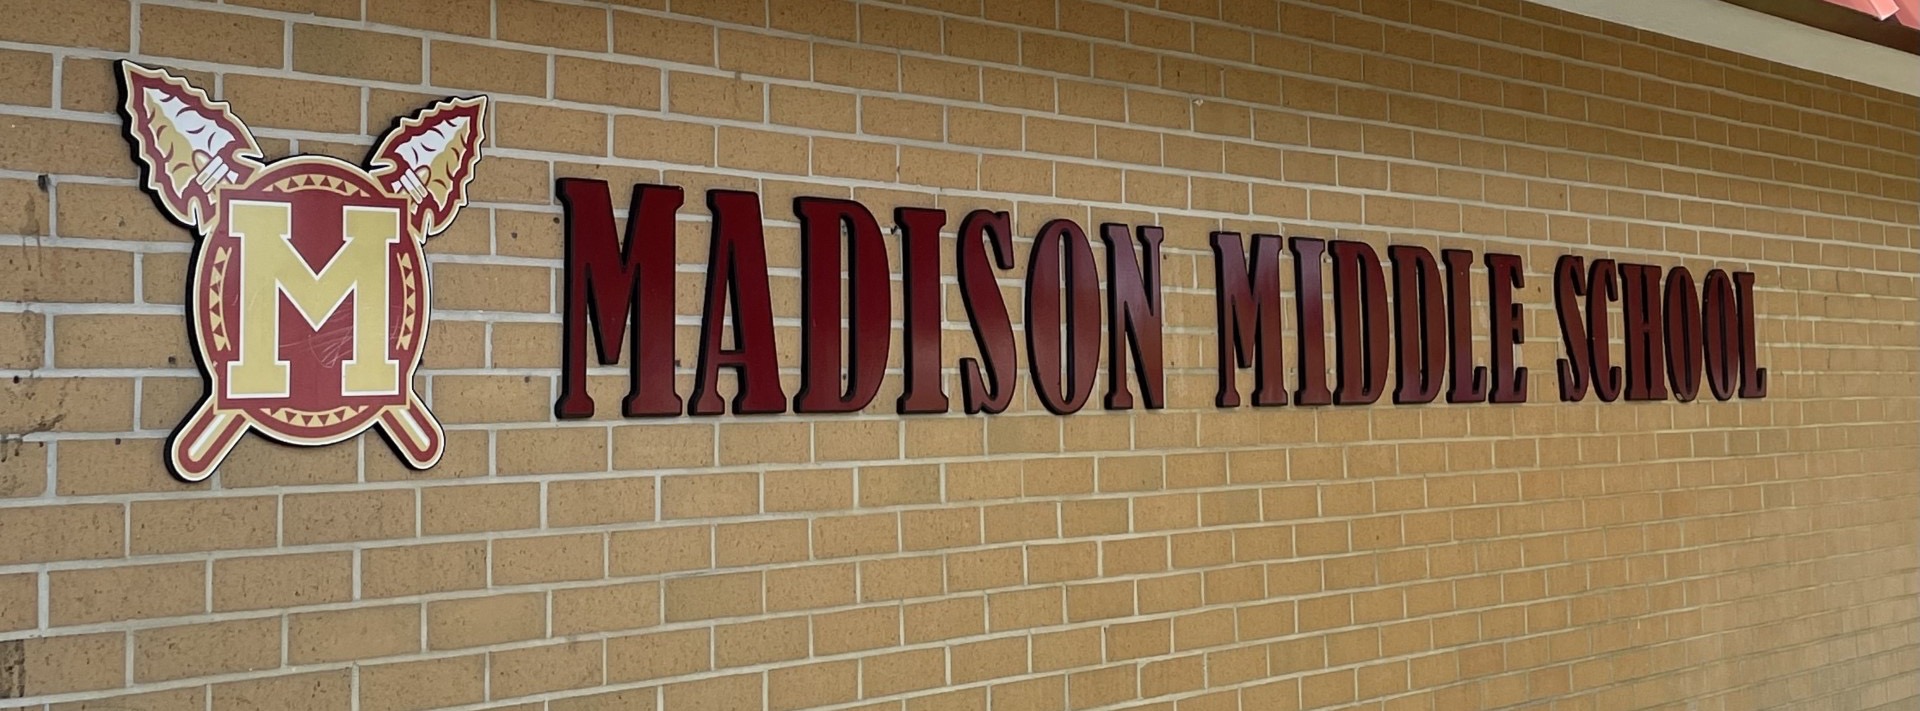 Madison middle school sign